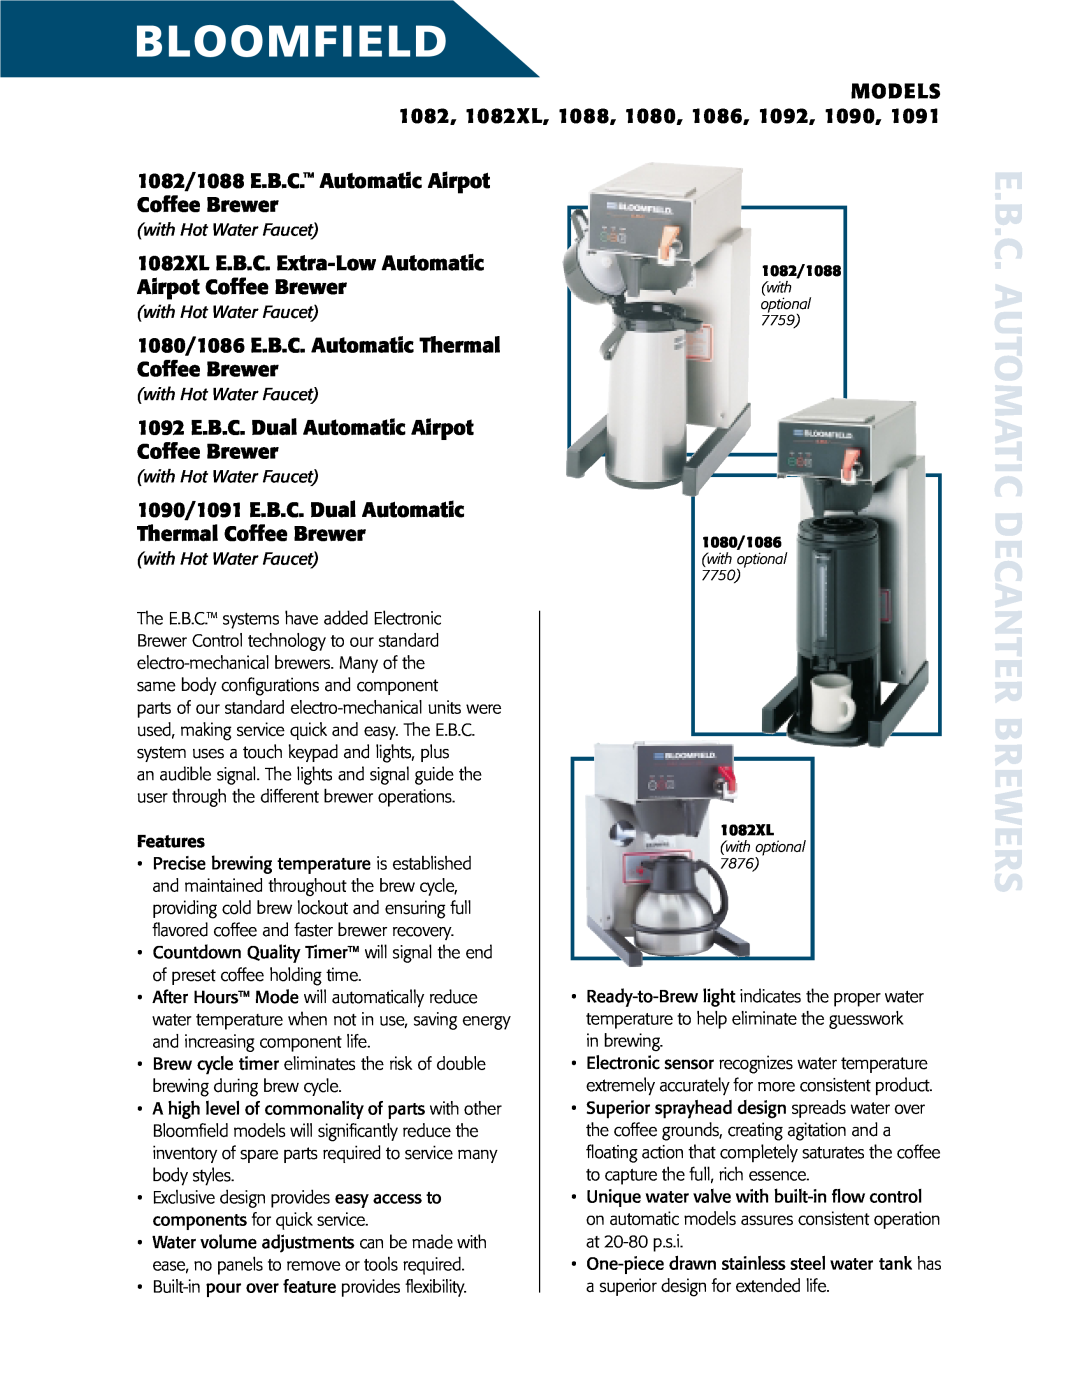 Bloomfield 1092 owner manual OWNERS MANUAL for, Dual Airpot And Thermal Coffee Brewers Models, Servicing Instructions, fax 